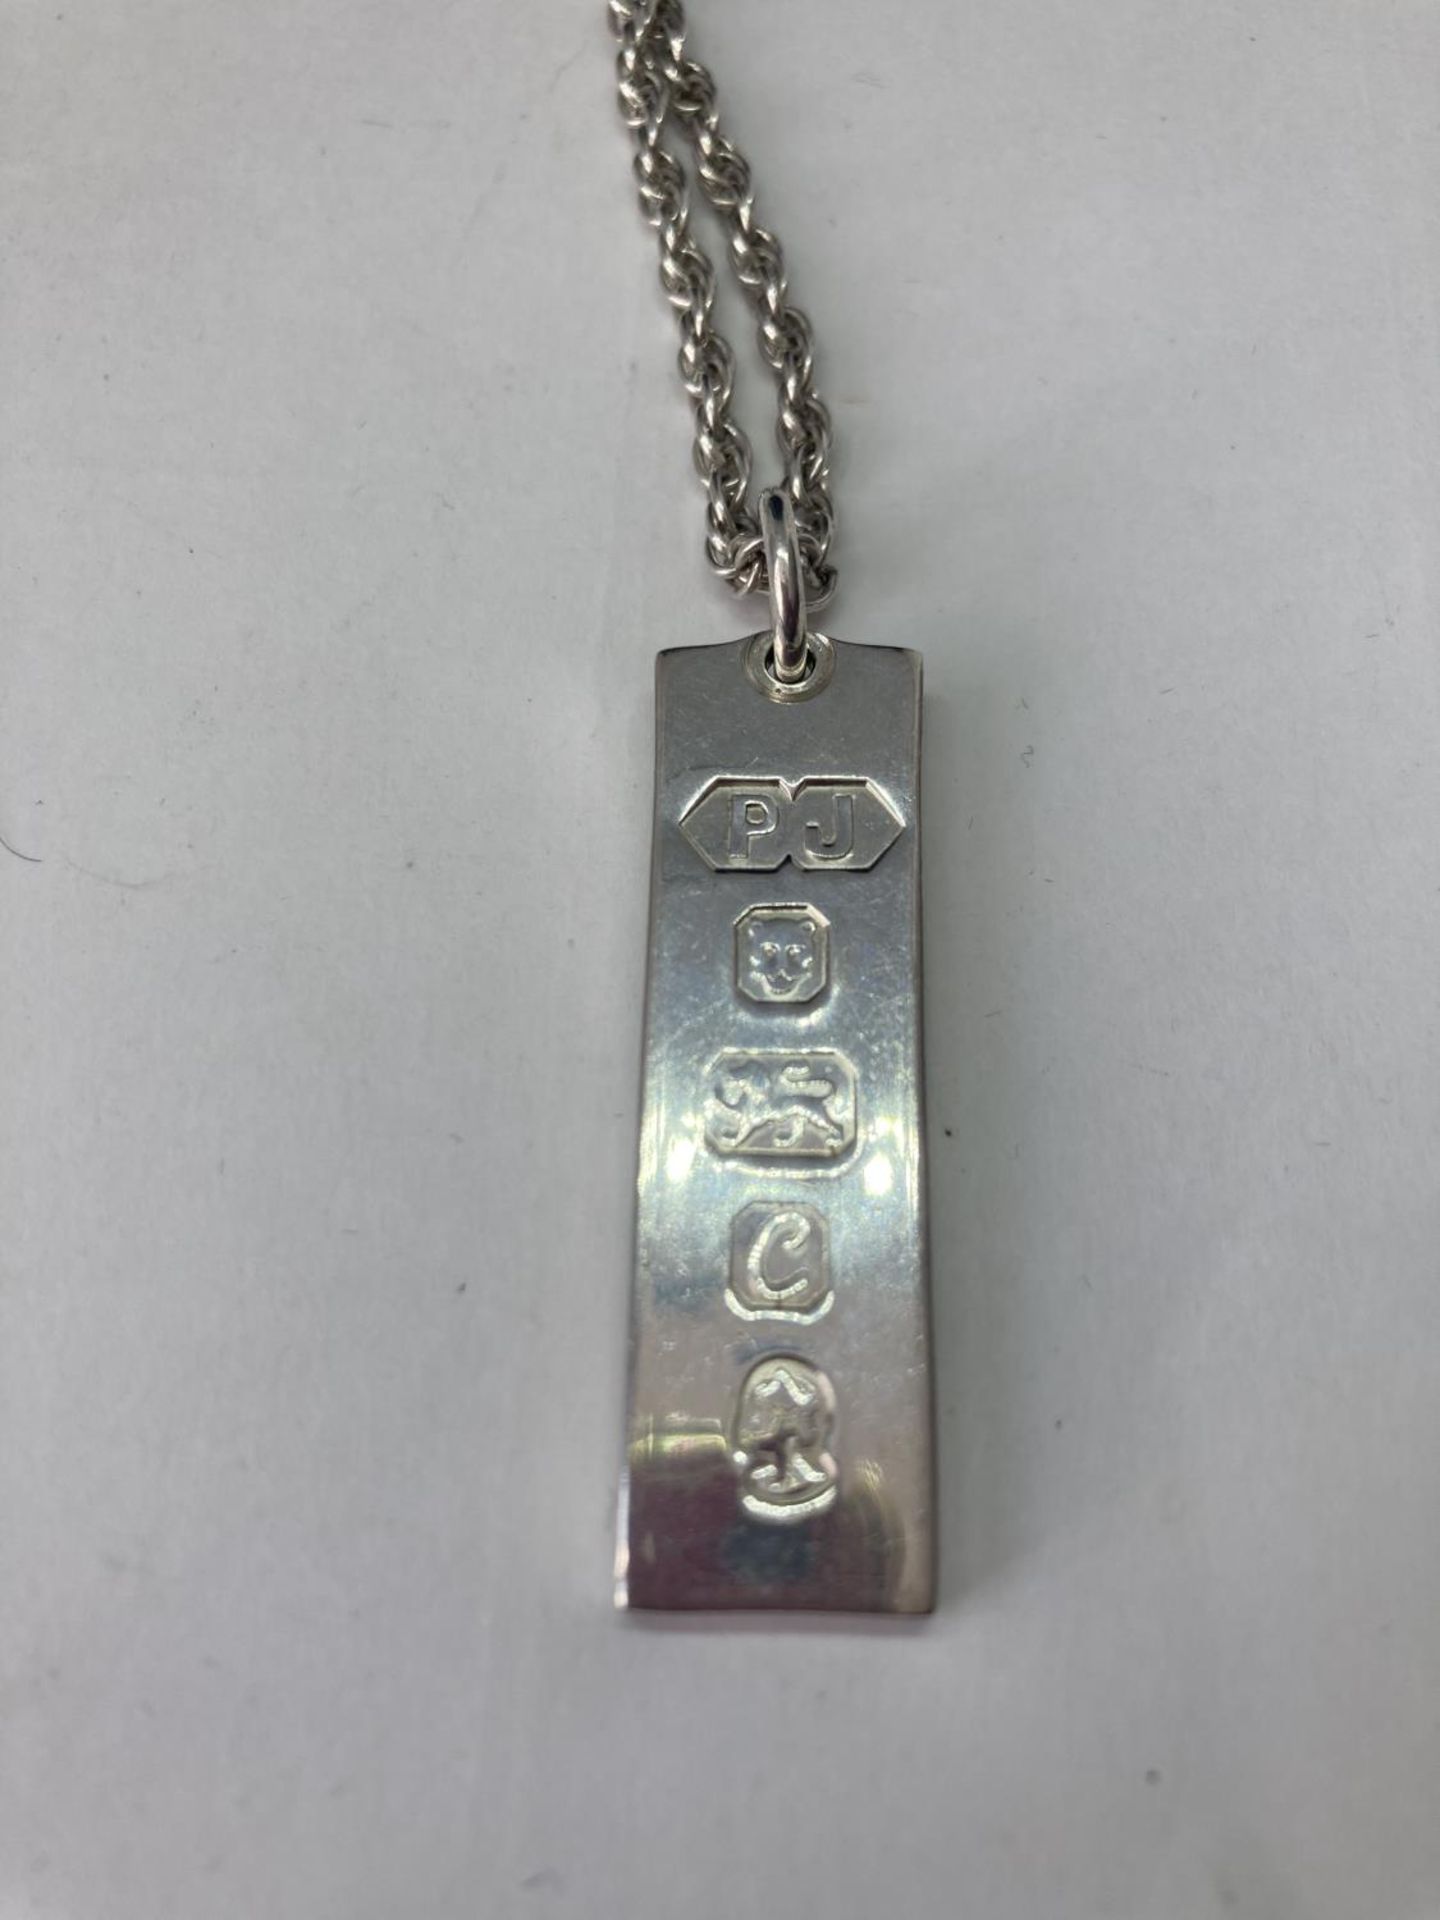 TWO SILVER NECKLACES WITH SILVER INGOT PENDANTS - Image 7 of 8